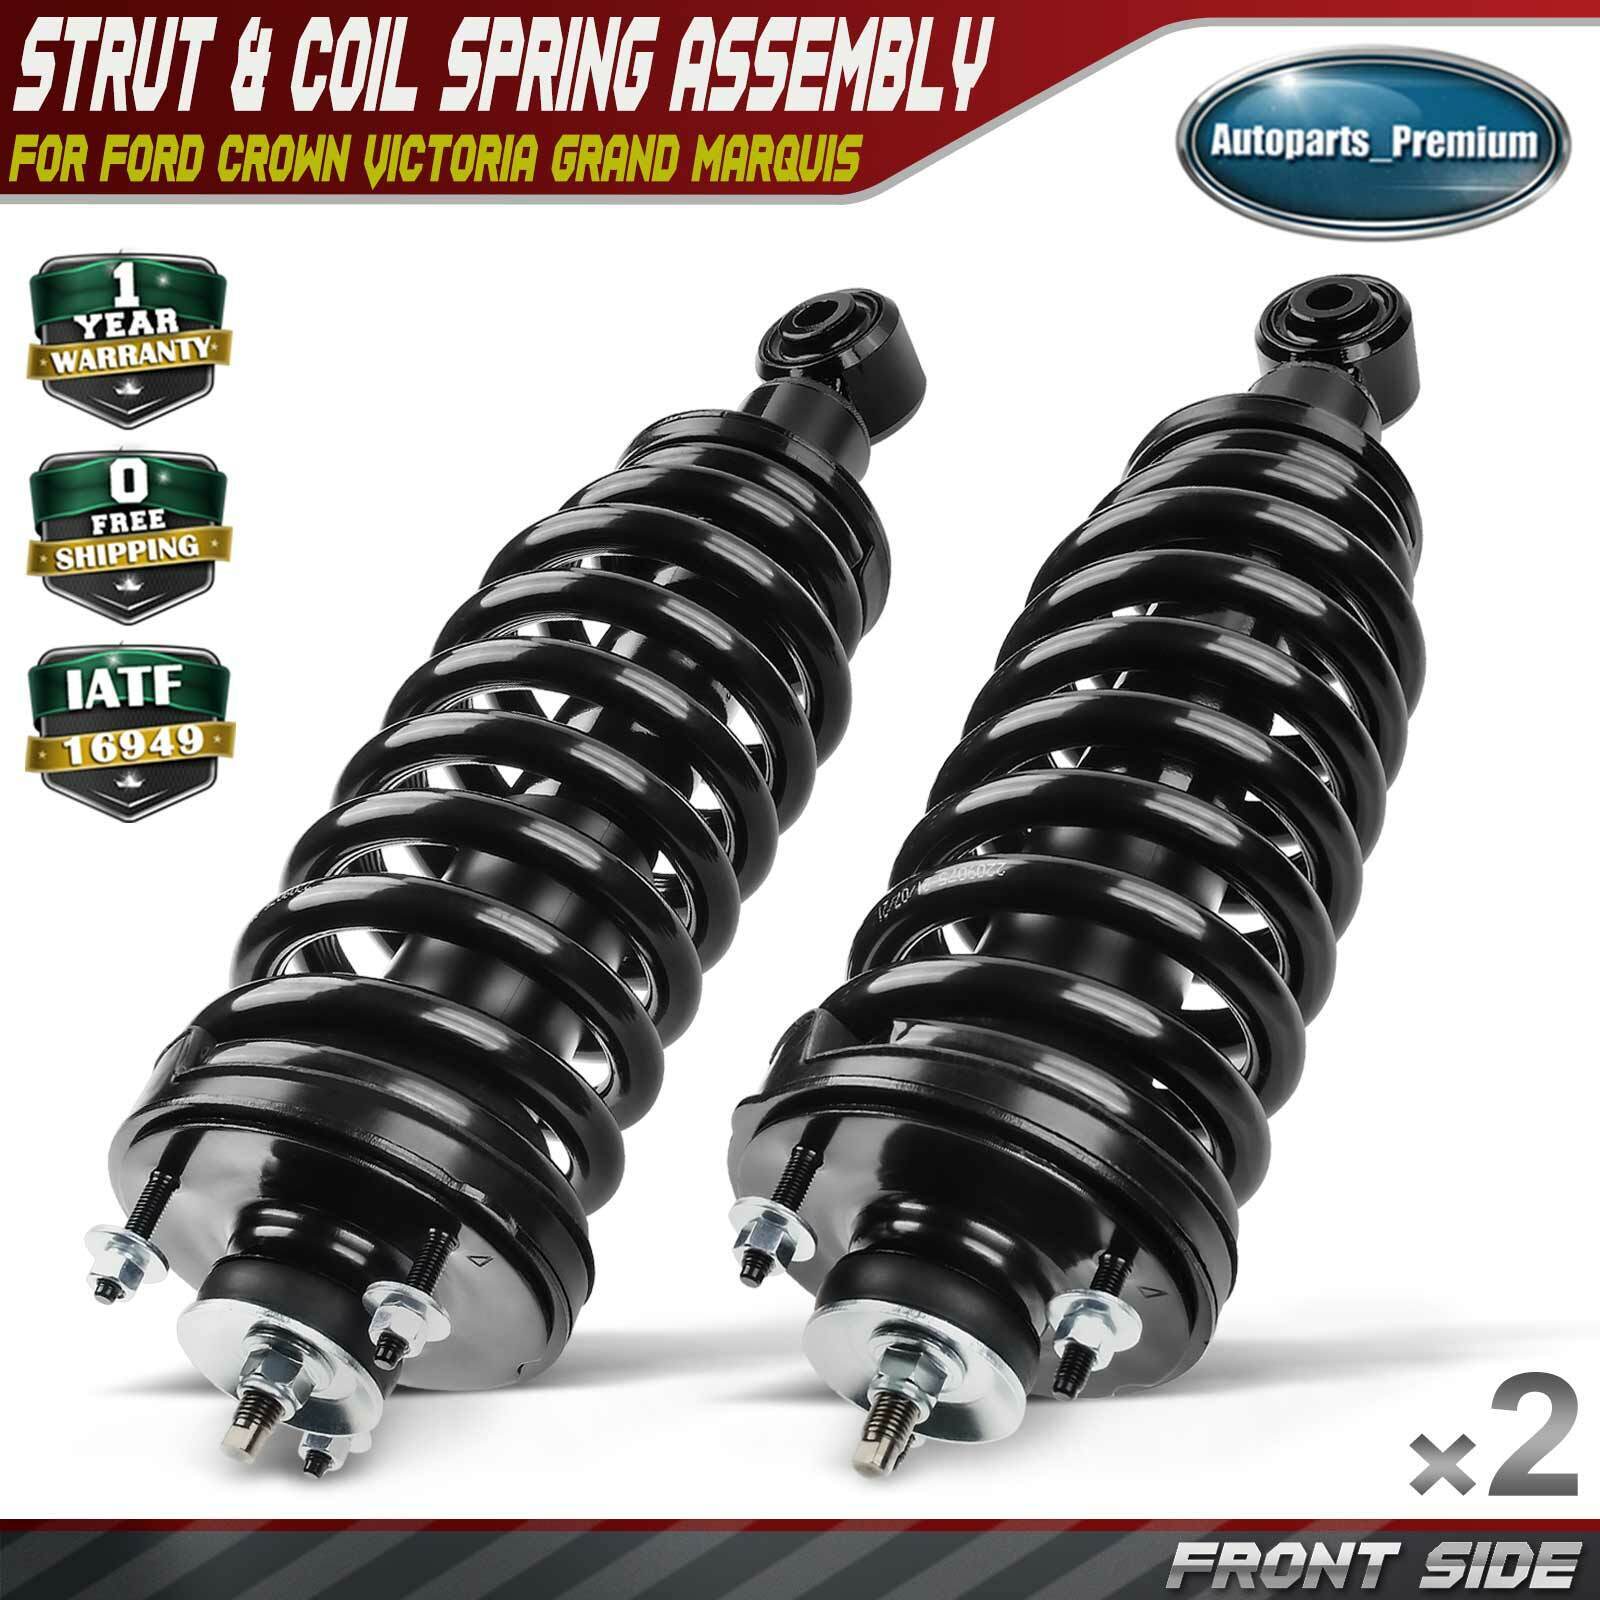 2x Front Complete Strut & Coil Spring Assembly for Ford Grand Marquis Mercury